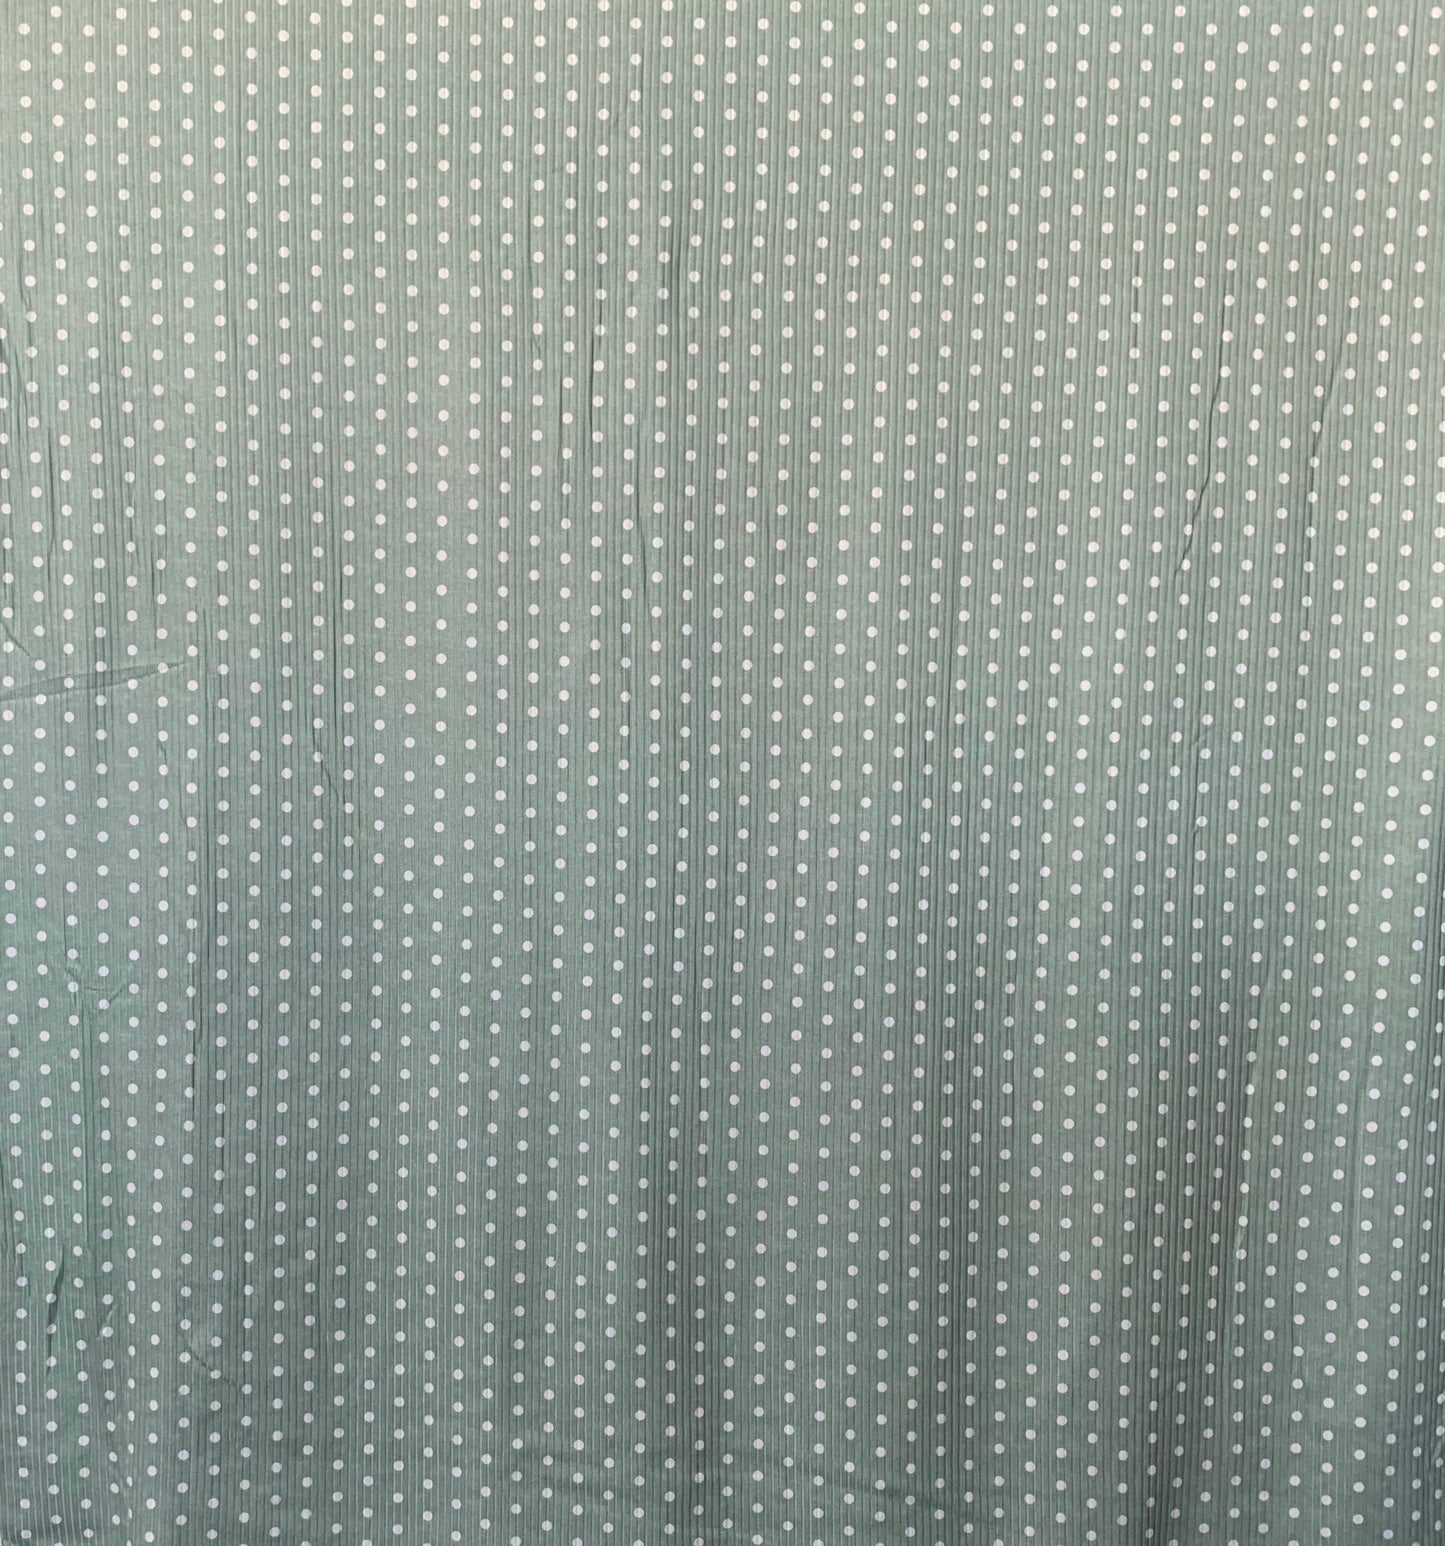 Polka Dot in Green on Brushed Rib Knit Fabric Sold by the 1/4 yard